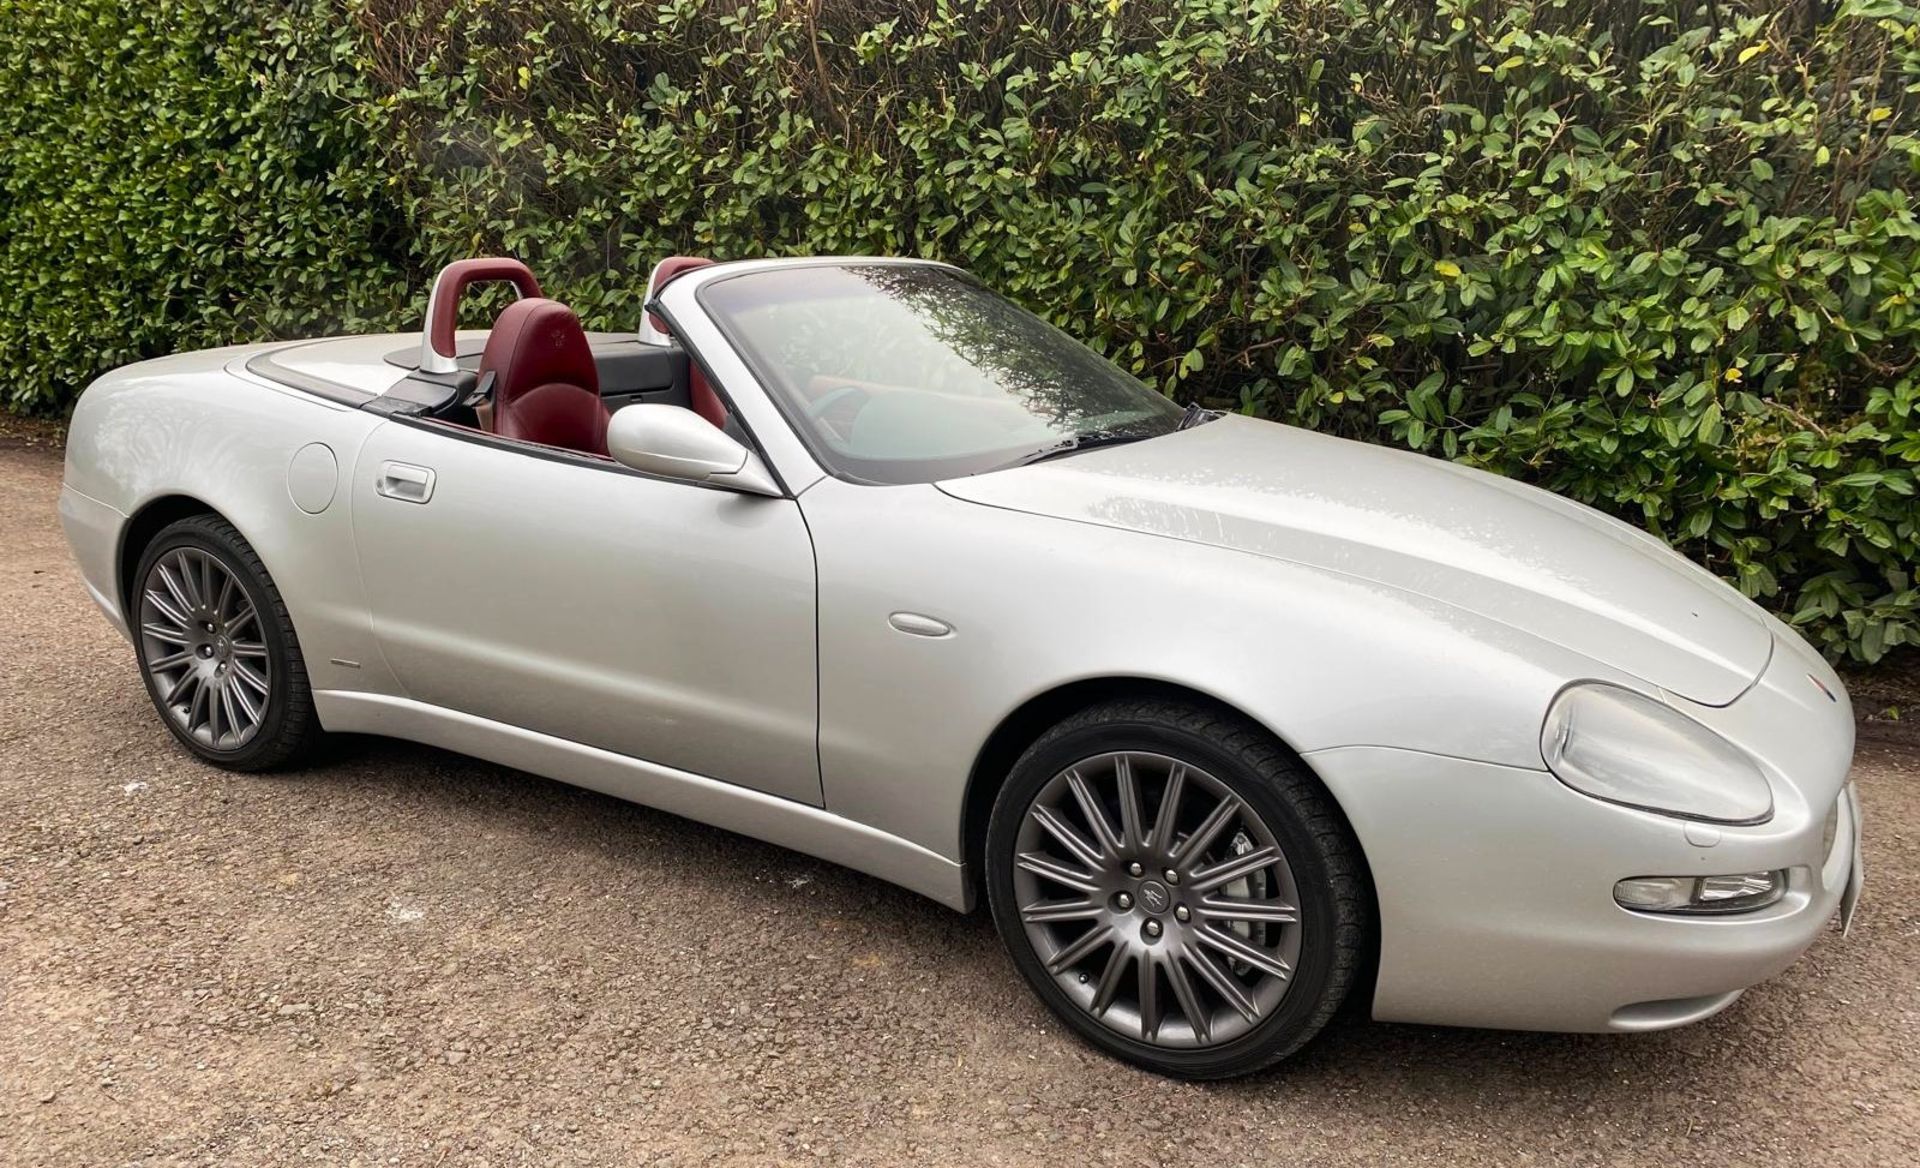 2002 MASERATI CAMBIOCORSA SPYDER Registration Number: YG02BZD Chassis Number: ZAMBB18C000005658 - Image 2 of 16